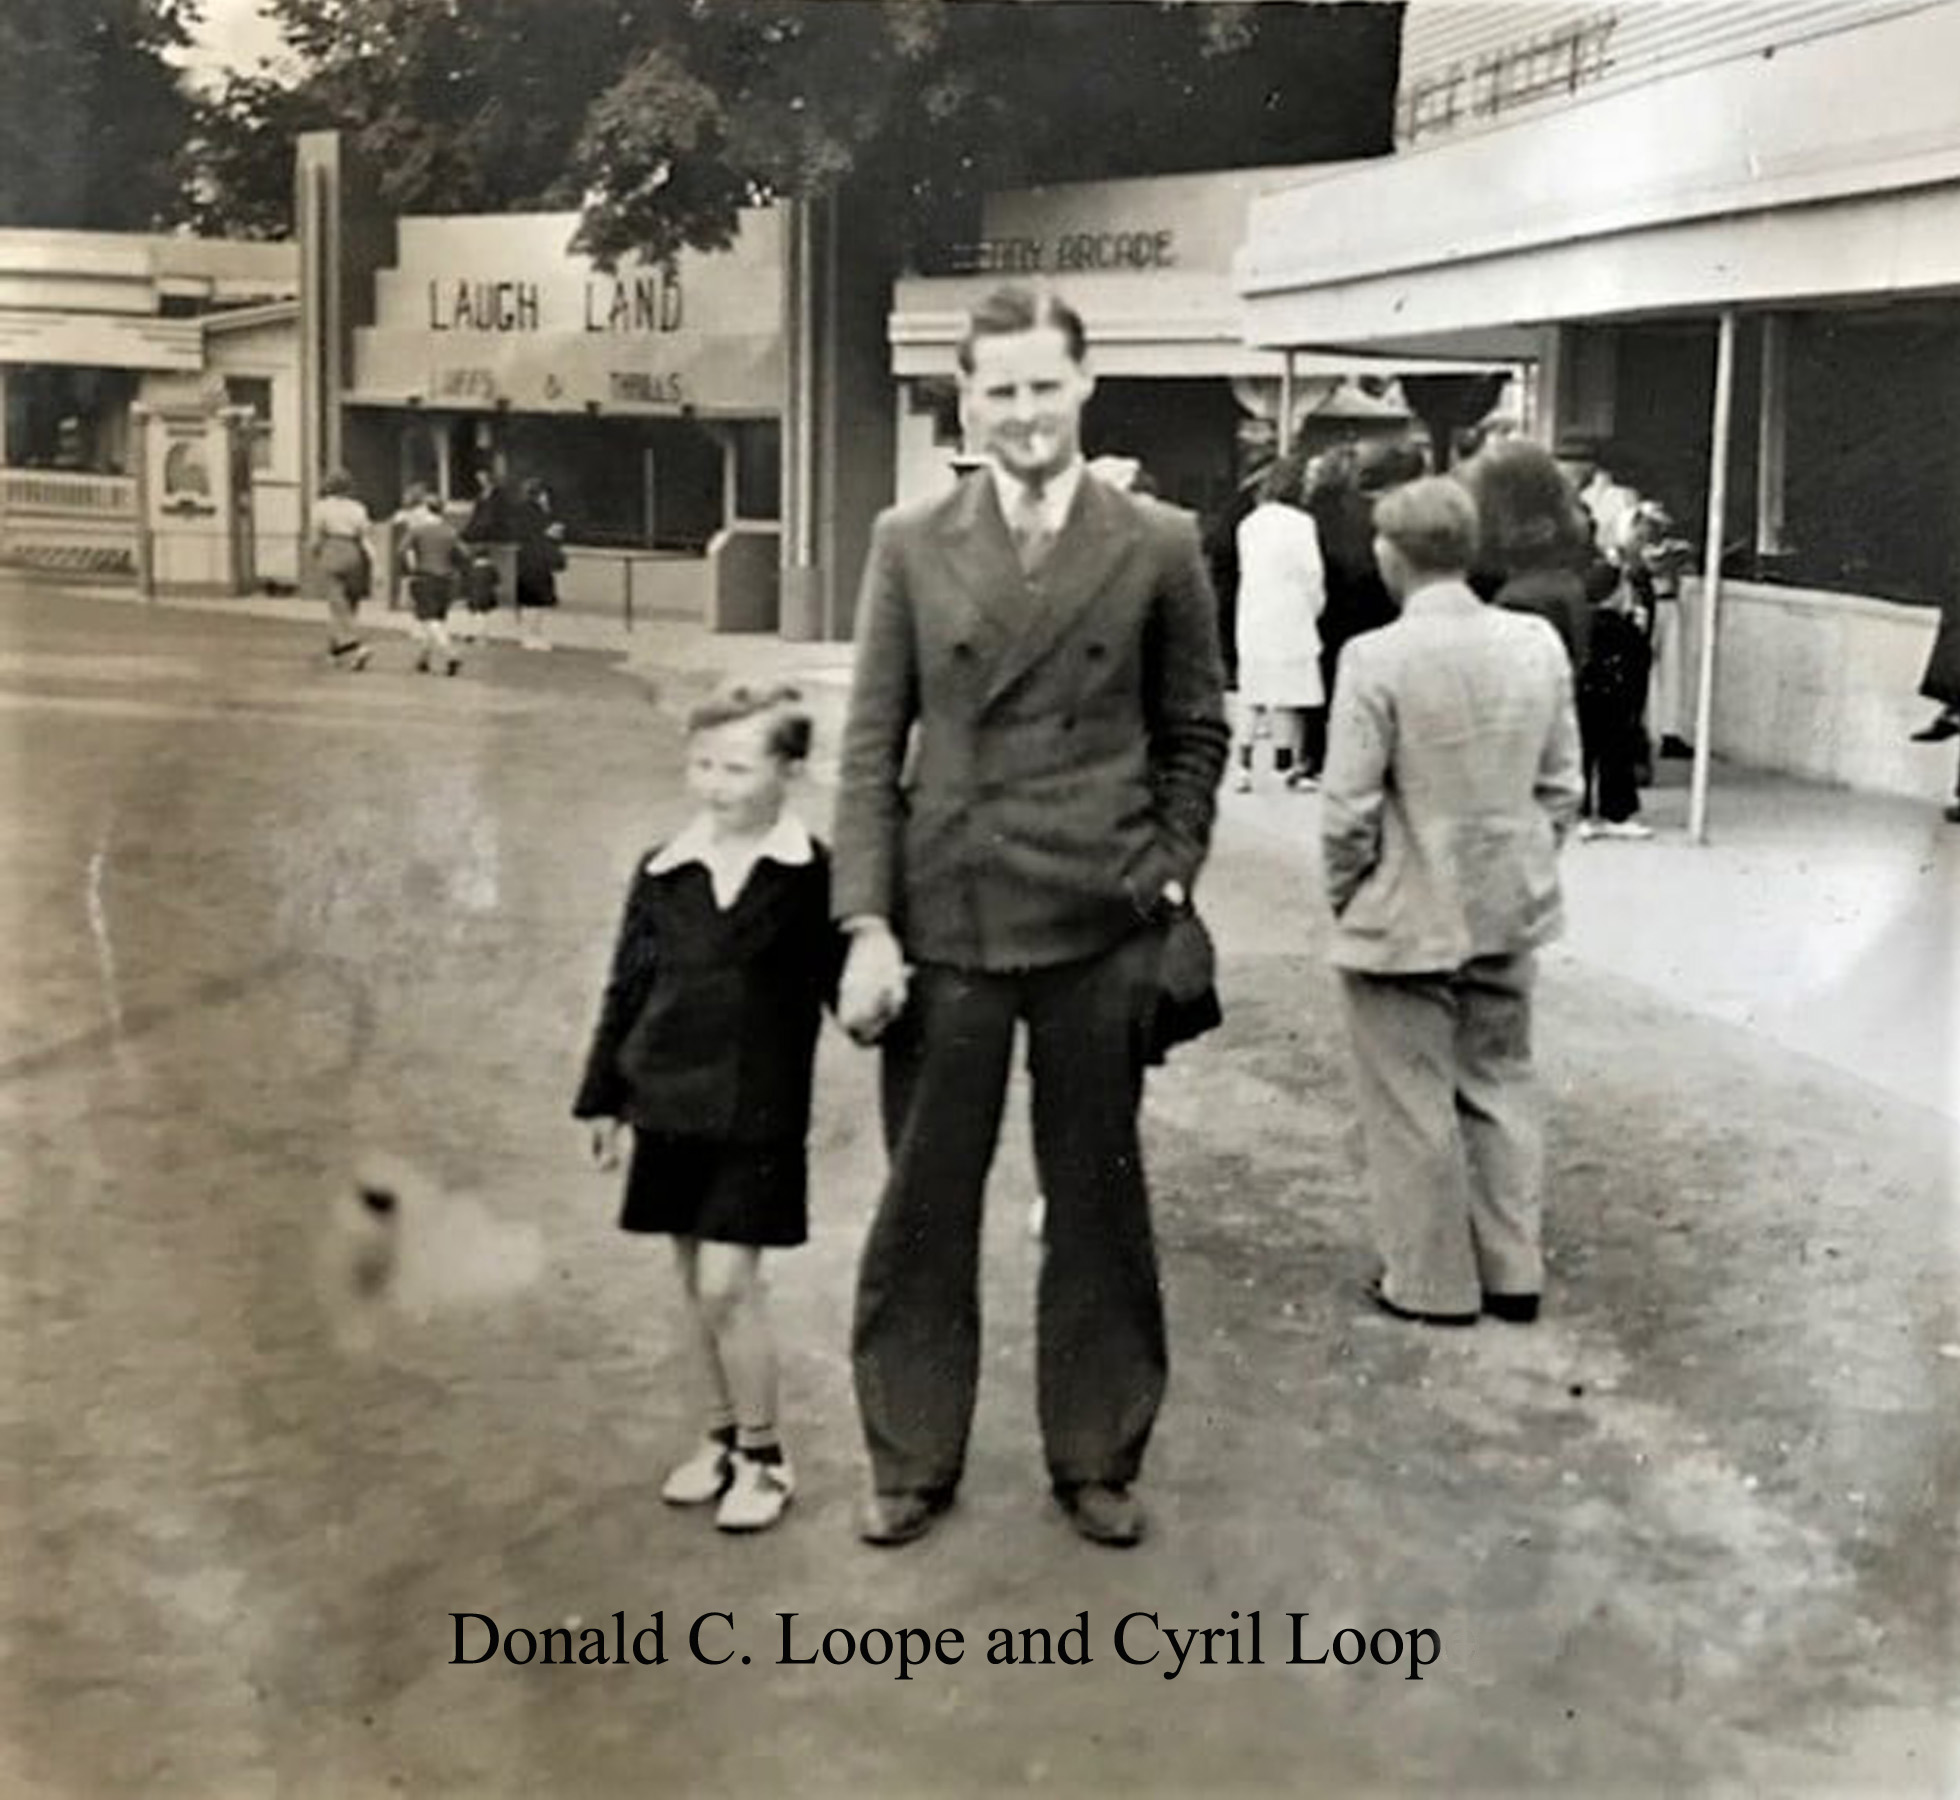 Donald C. Loope and Cyril Loope